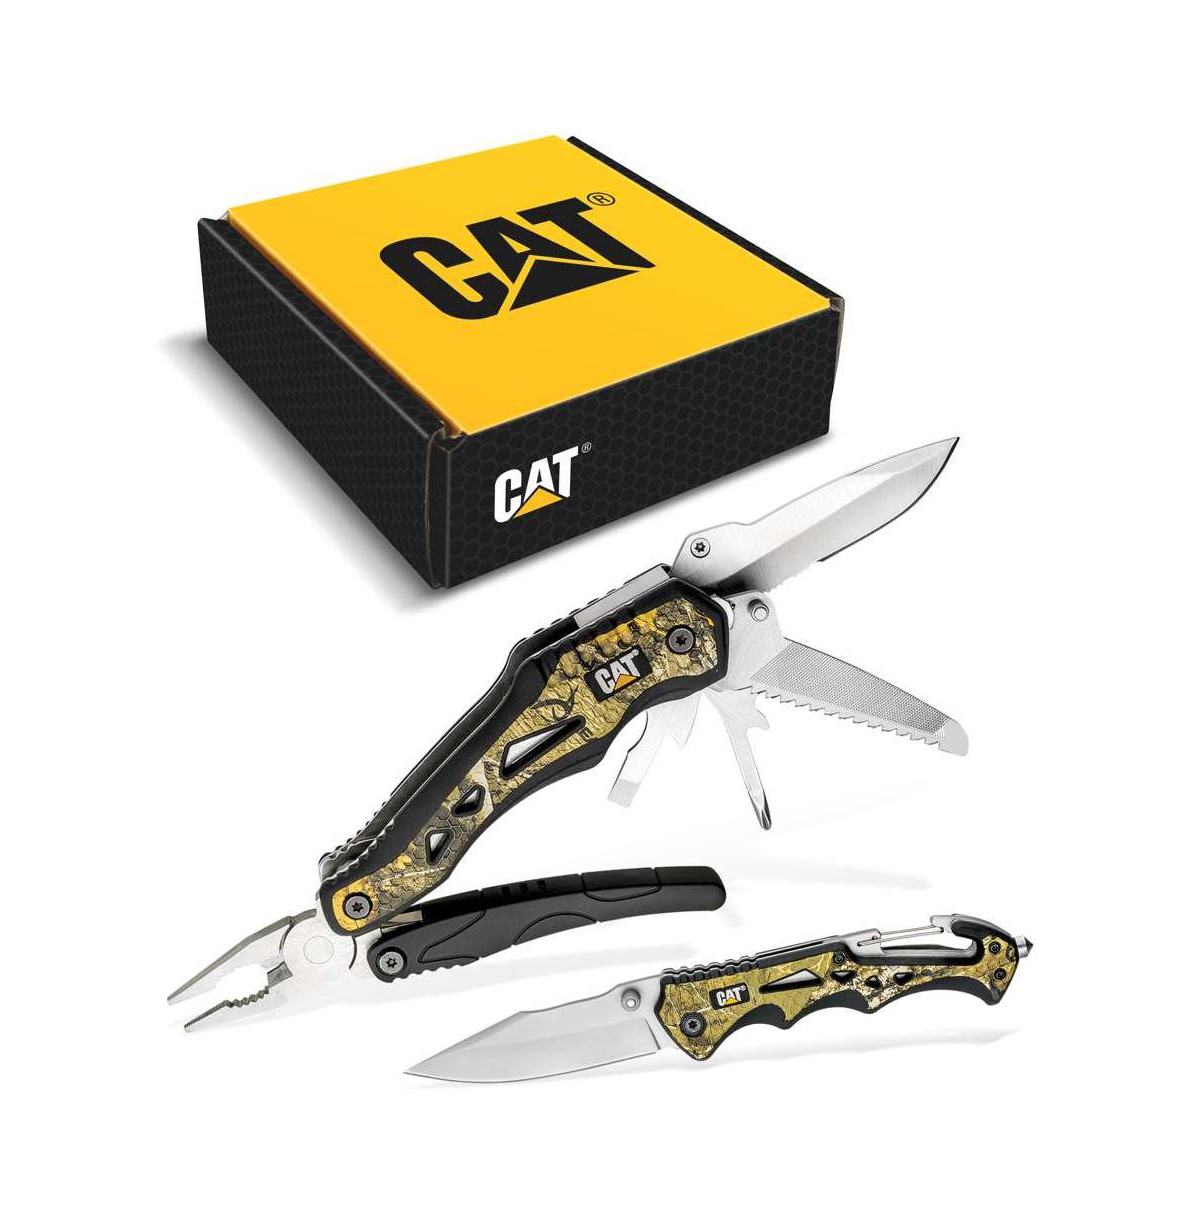 2 Piece Multi-Tool and Knife Gift Box Set with Real Tree Camo - Brown